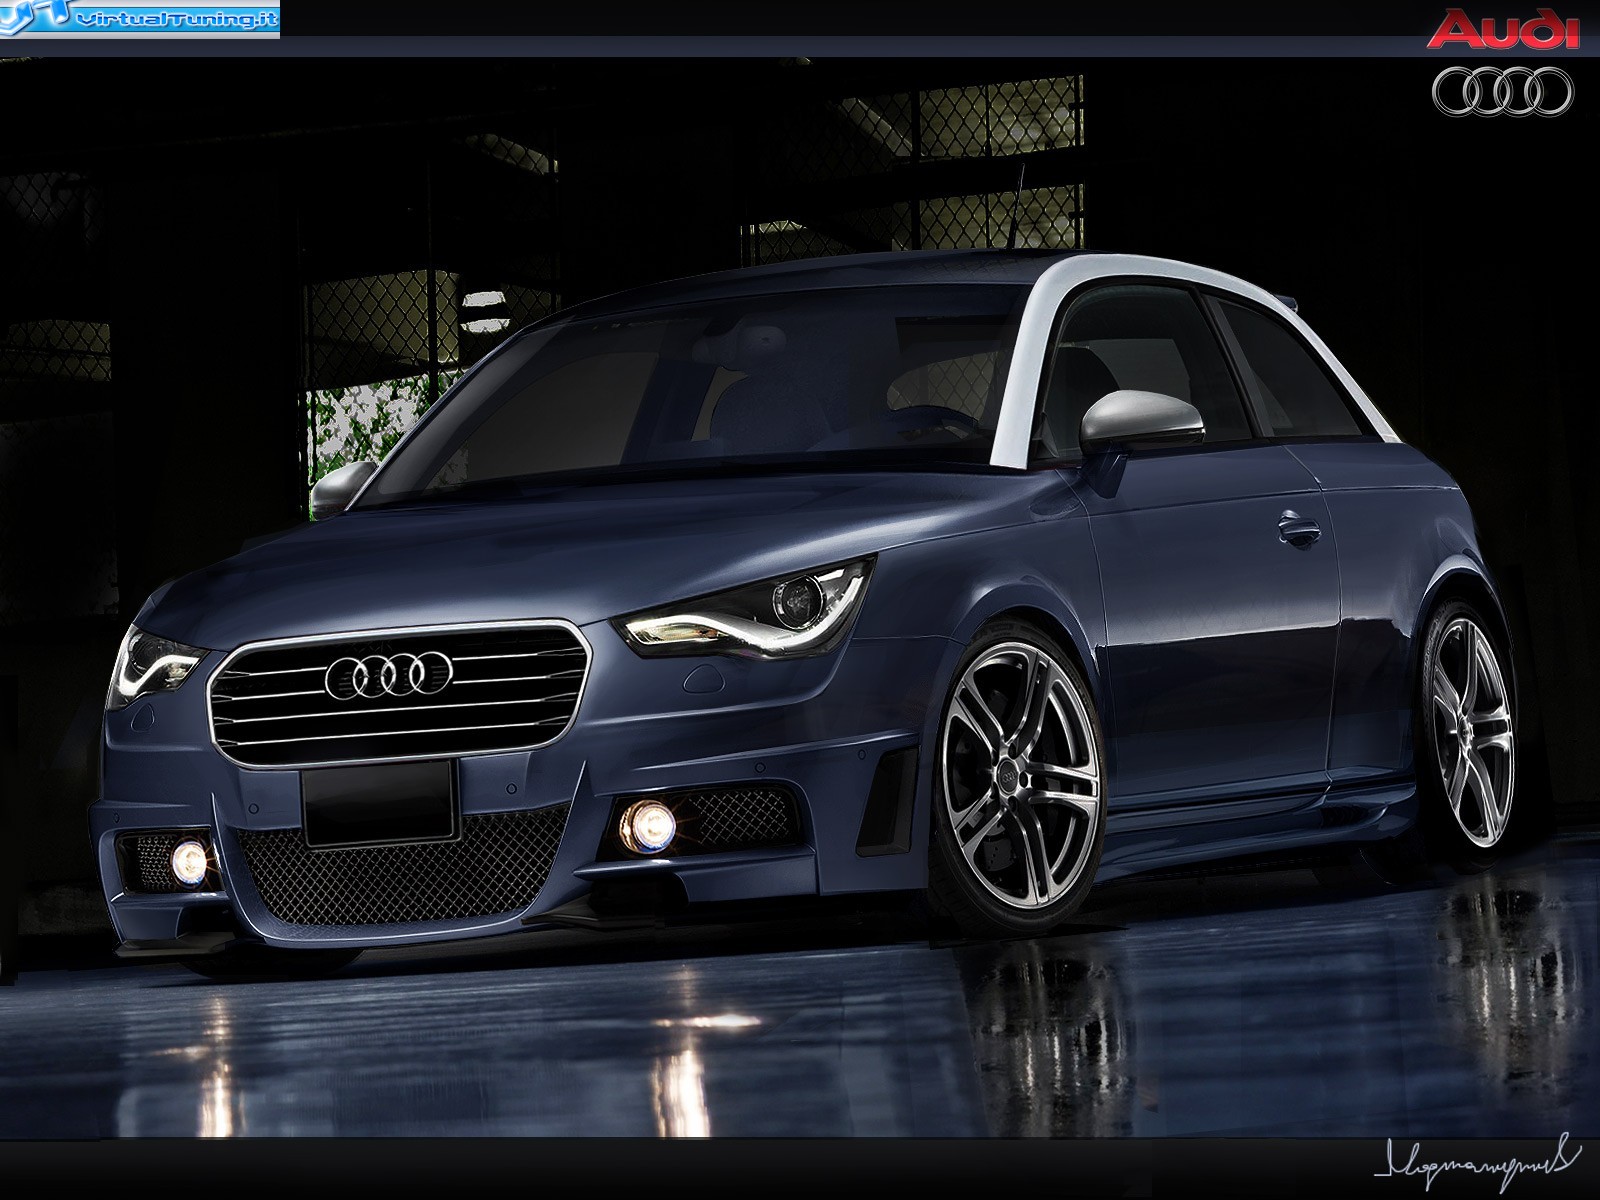 VirtualTuning AUDI A1 by Magnanymus